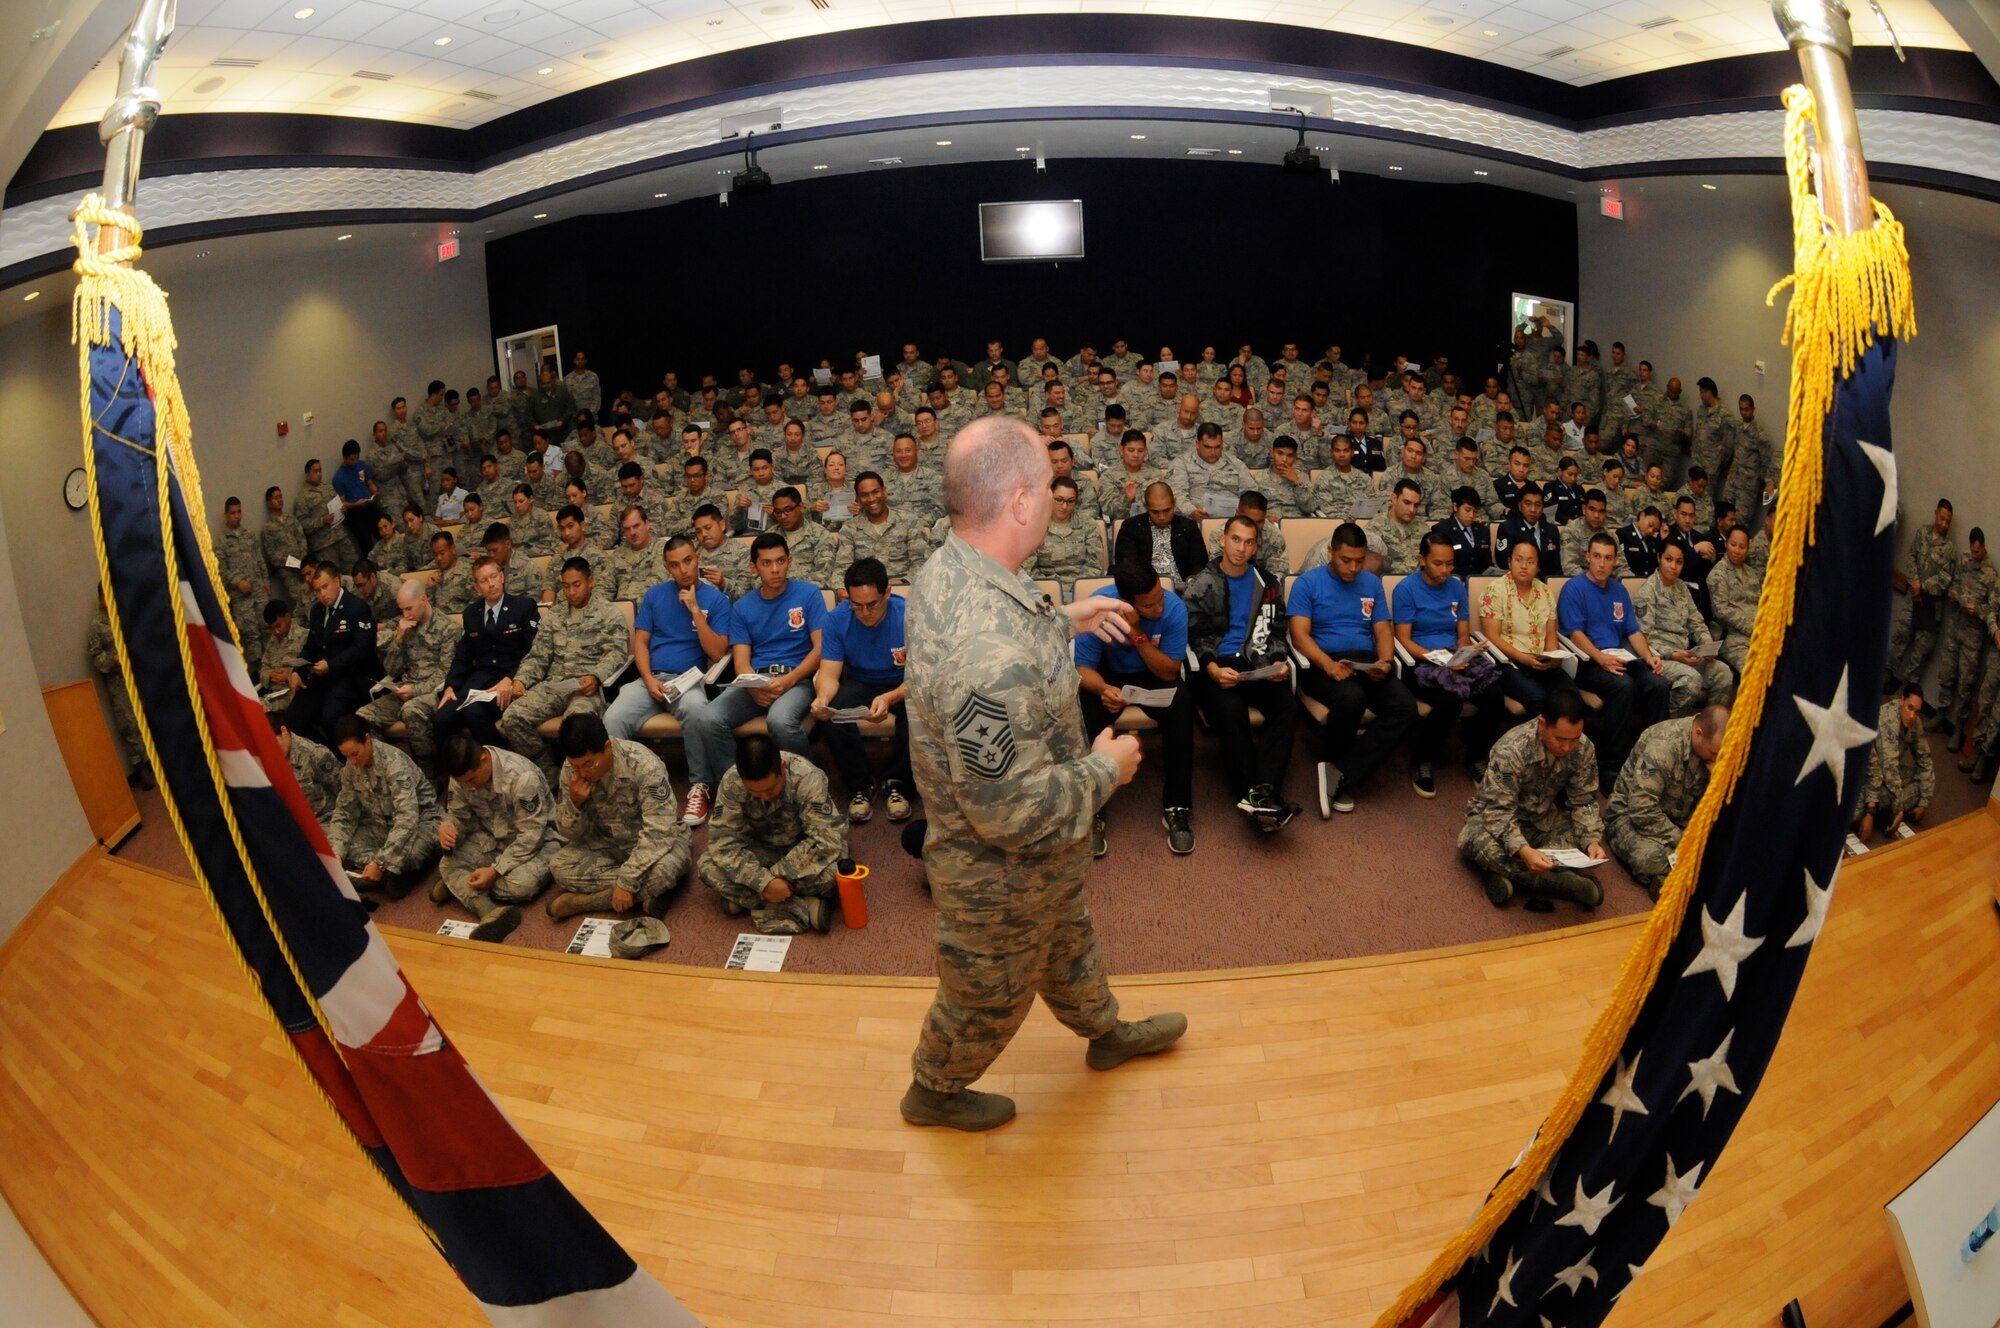 Chief Master Sgt. James W. Hotaling, command chief master sergeant of the Air National Guard, addresses Airmen from the 154 Wing, Hawaii Air National Guard, during a Town Hall Meeting at Joint Base Pearl Harbor Hickam on Nov. 9, 2014. Hotaling encouraged the Airmen to renew their commitment to the profession of arms through the Air Force core values, focus on performance and training, and the deliberate development of Airmen. (U.S. Air National Guard photo by Airman 1st Class Robert Cabuco)
